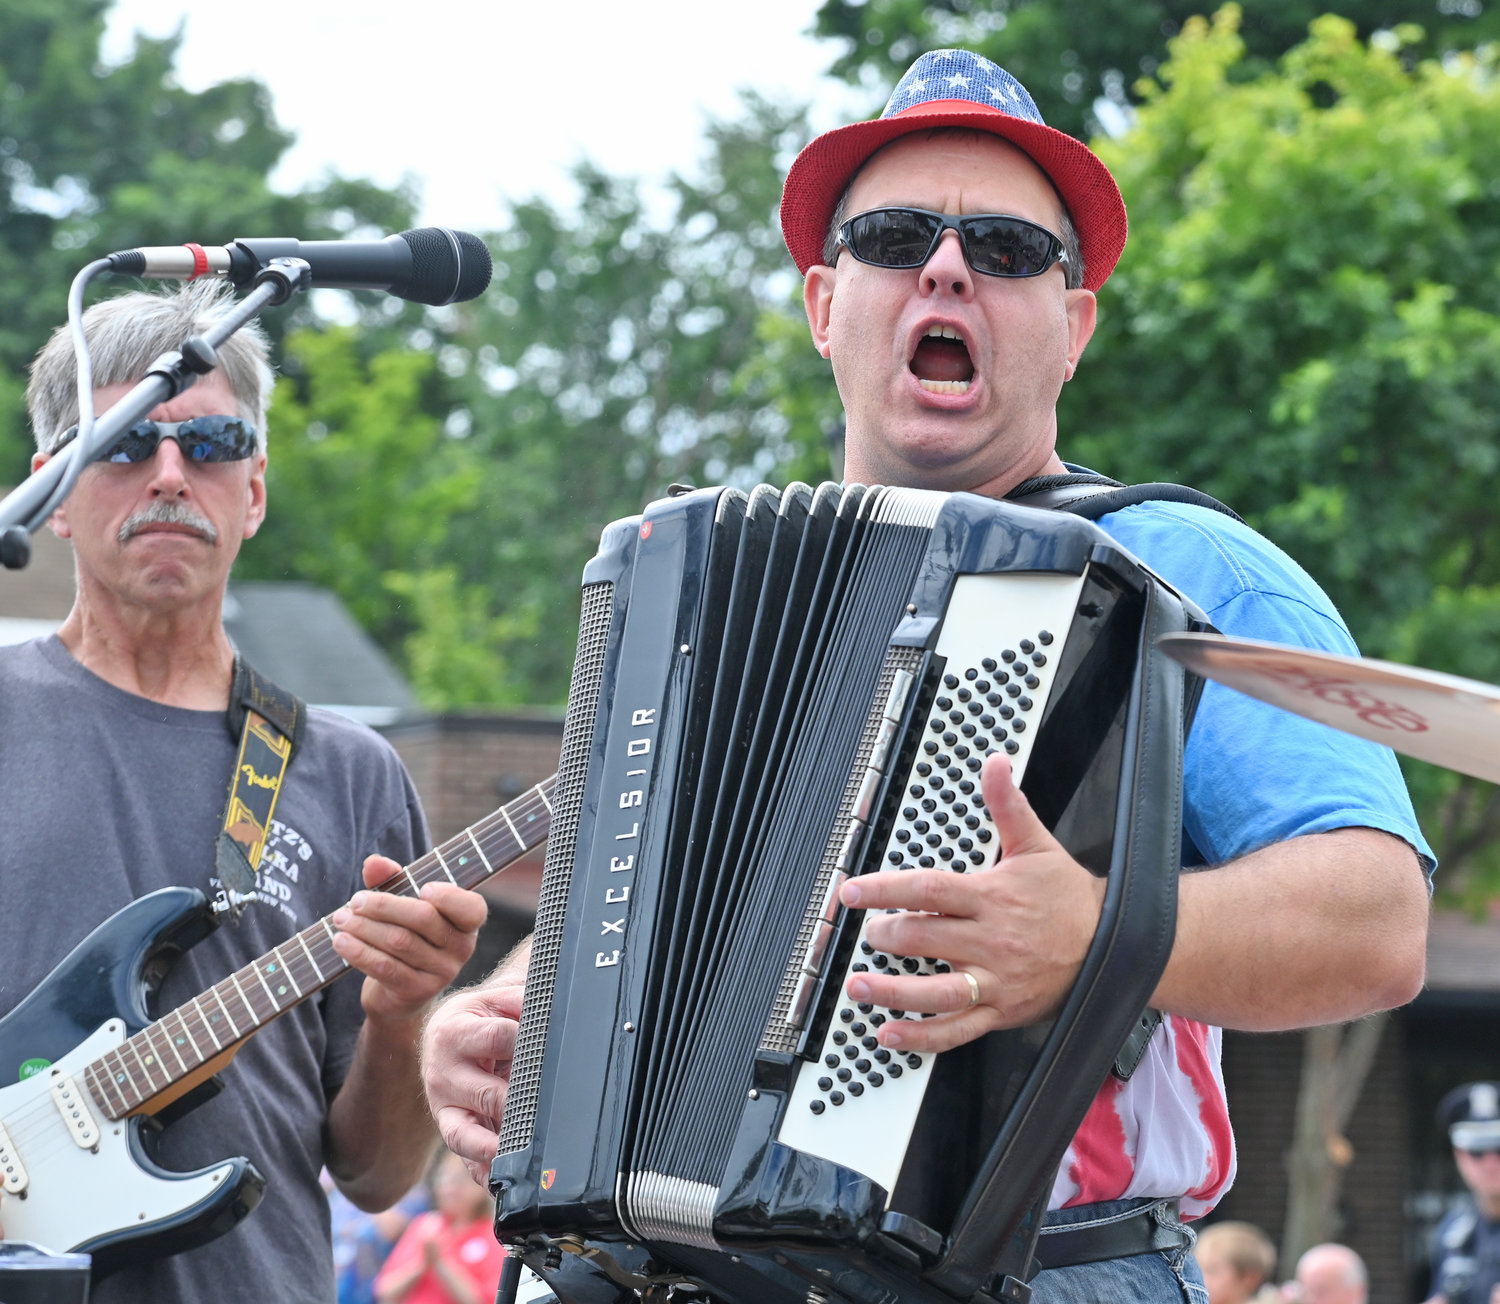 Fritz Scherz and the rest of Fritz’s Polka Band delight the crowd as they perform on a float during Saturday’s parade.